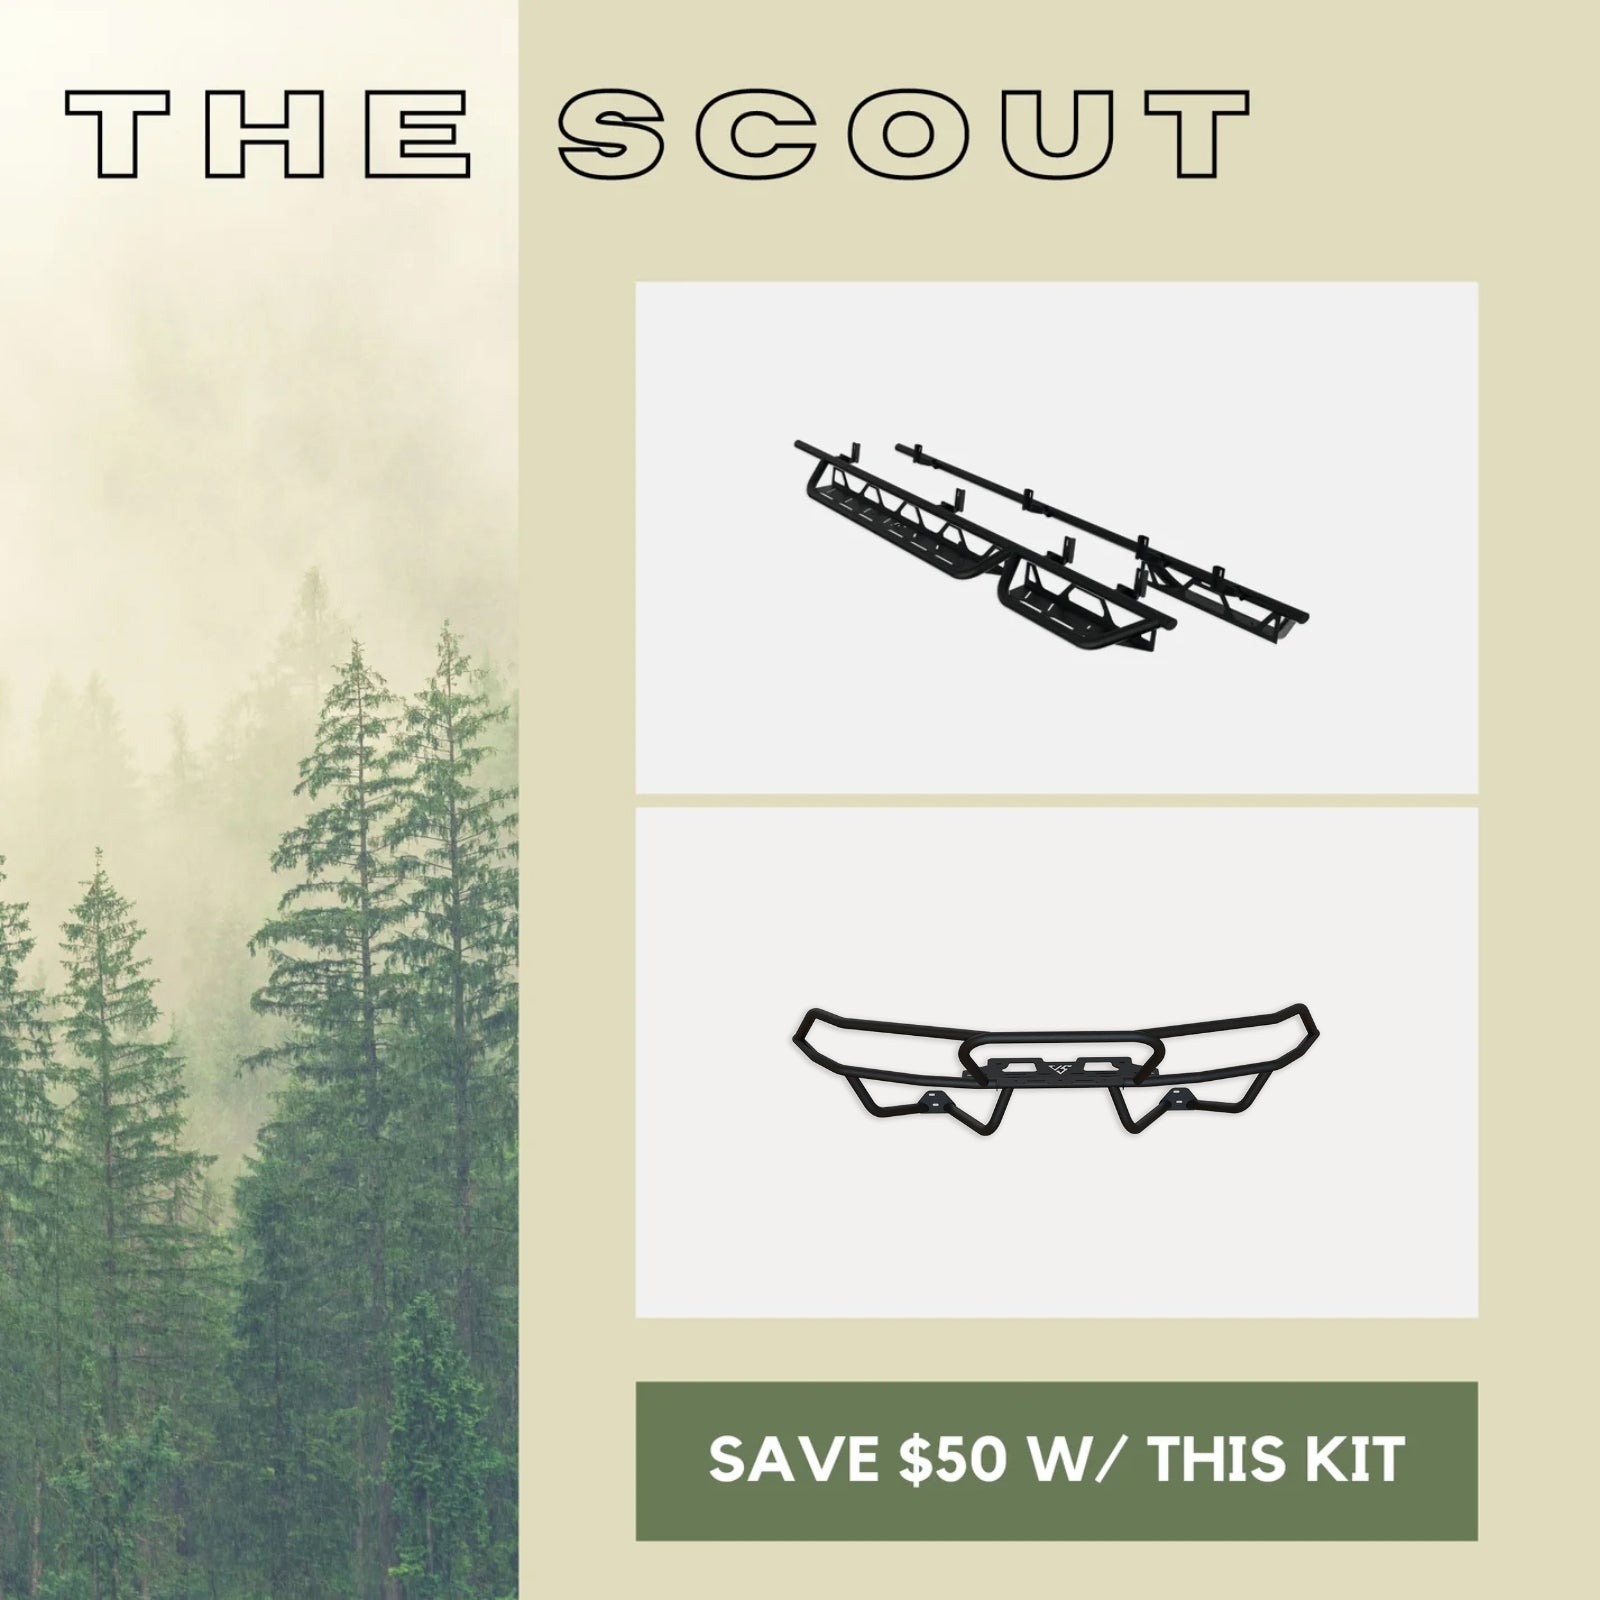 THE SCOUT KIT